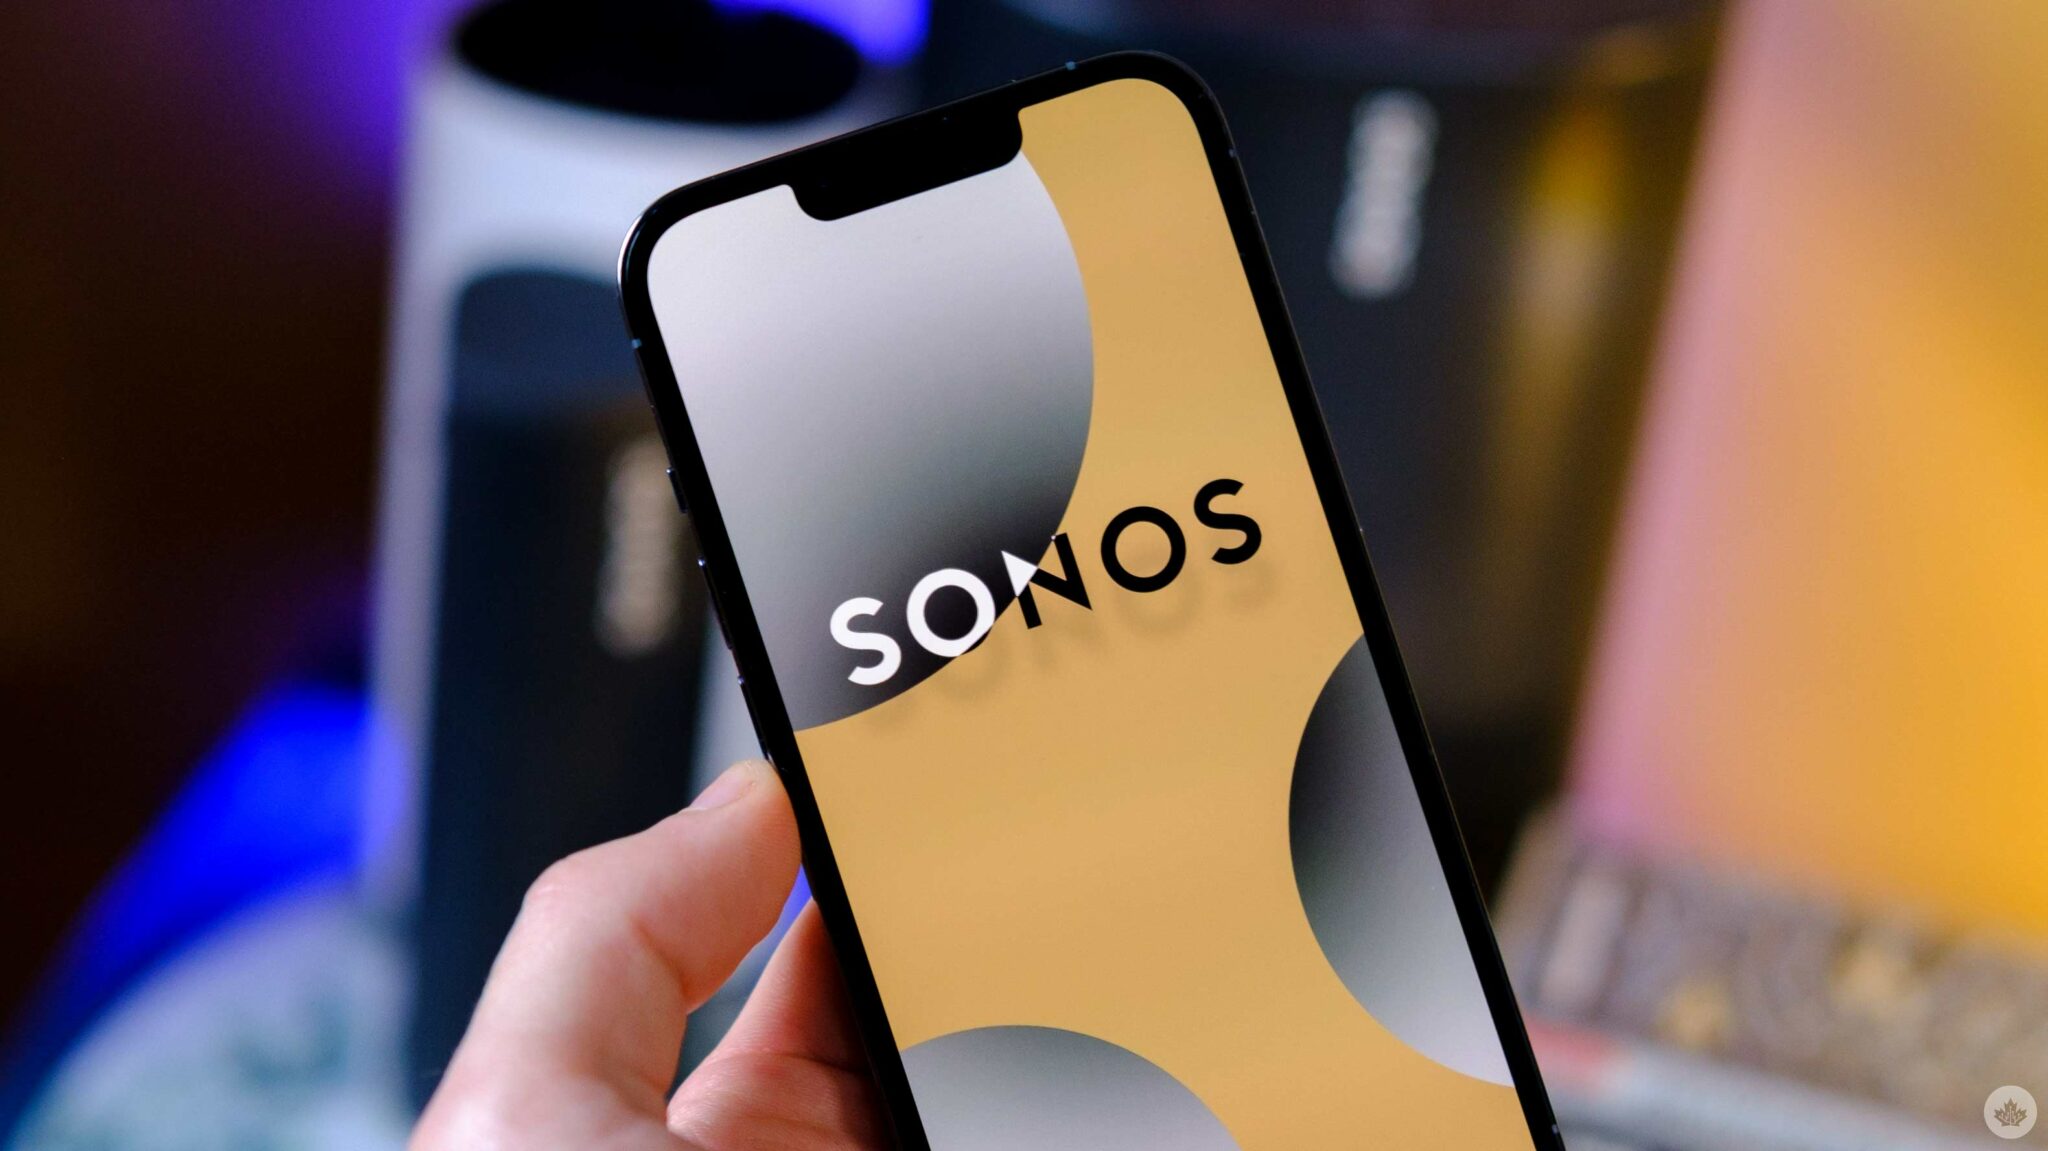 Sonos working to make future products more efficient and repairable